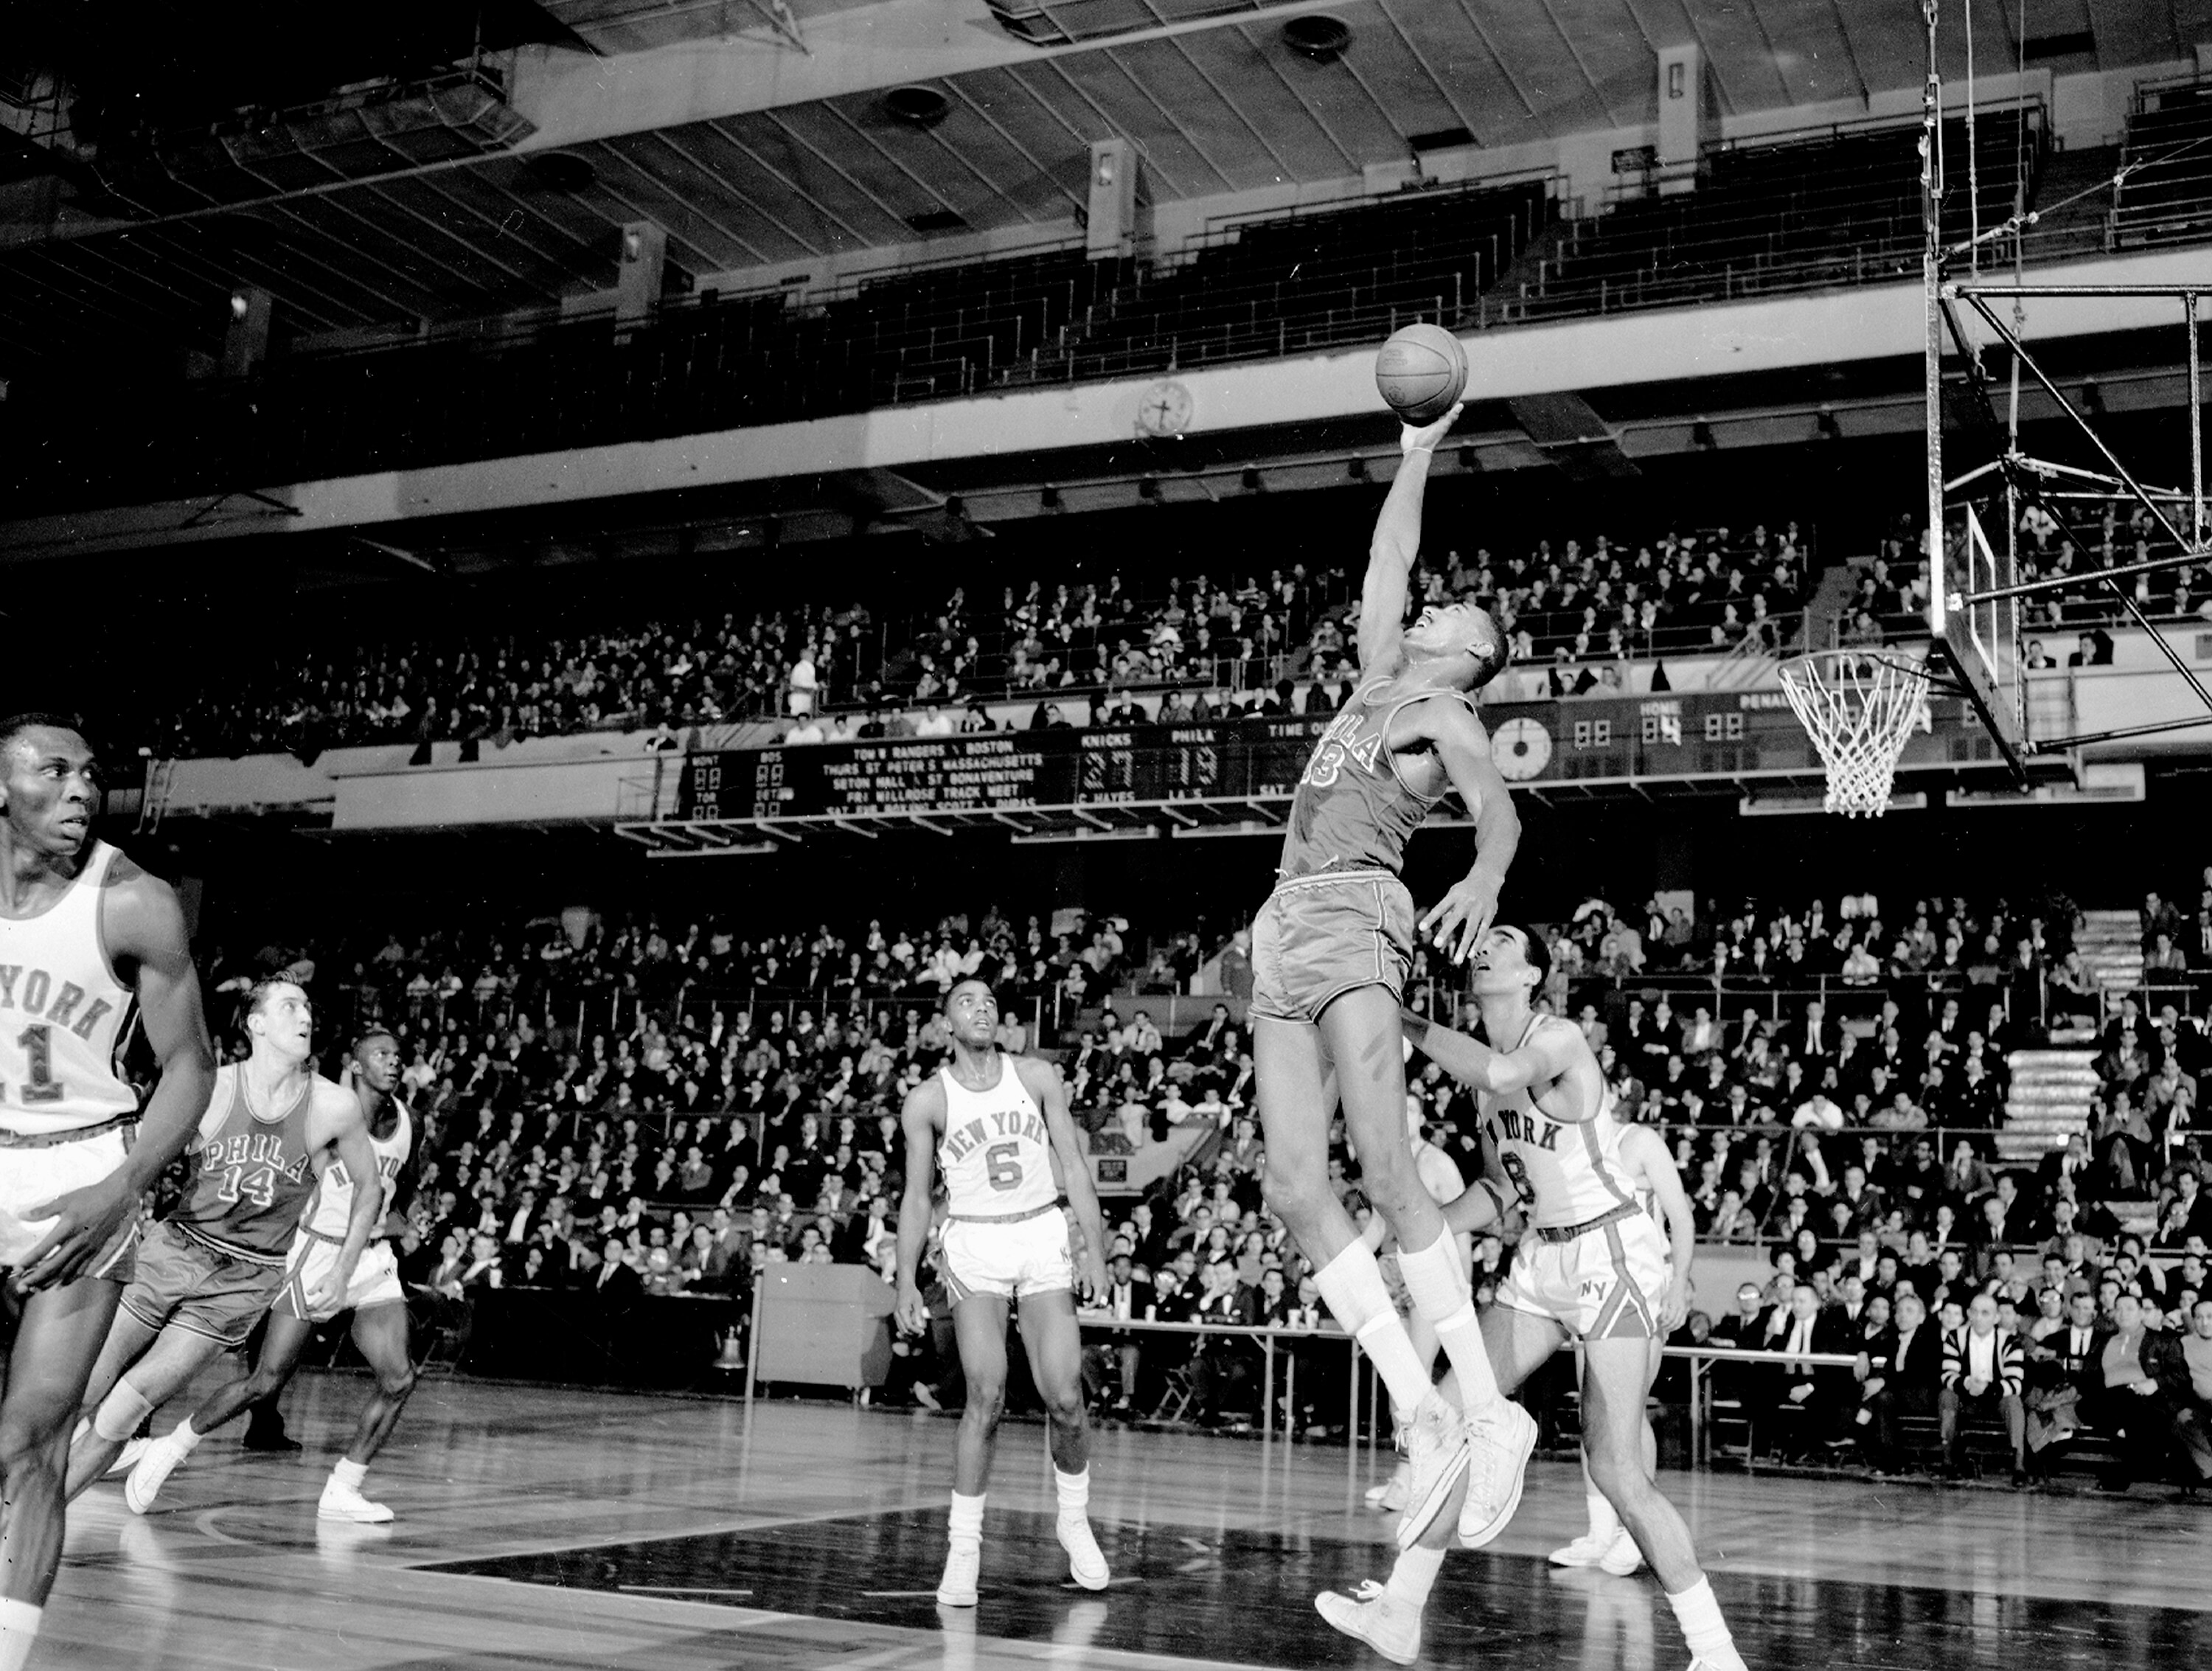 For Years, Wilt Chamberlain Mistakenly Believed the Game Ended After He Scored 100 Points Against the Knicks